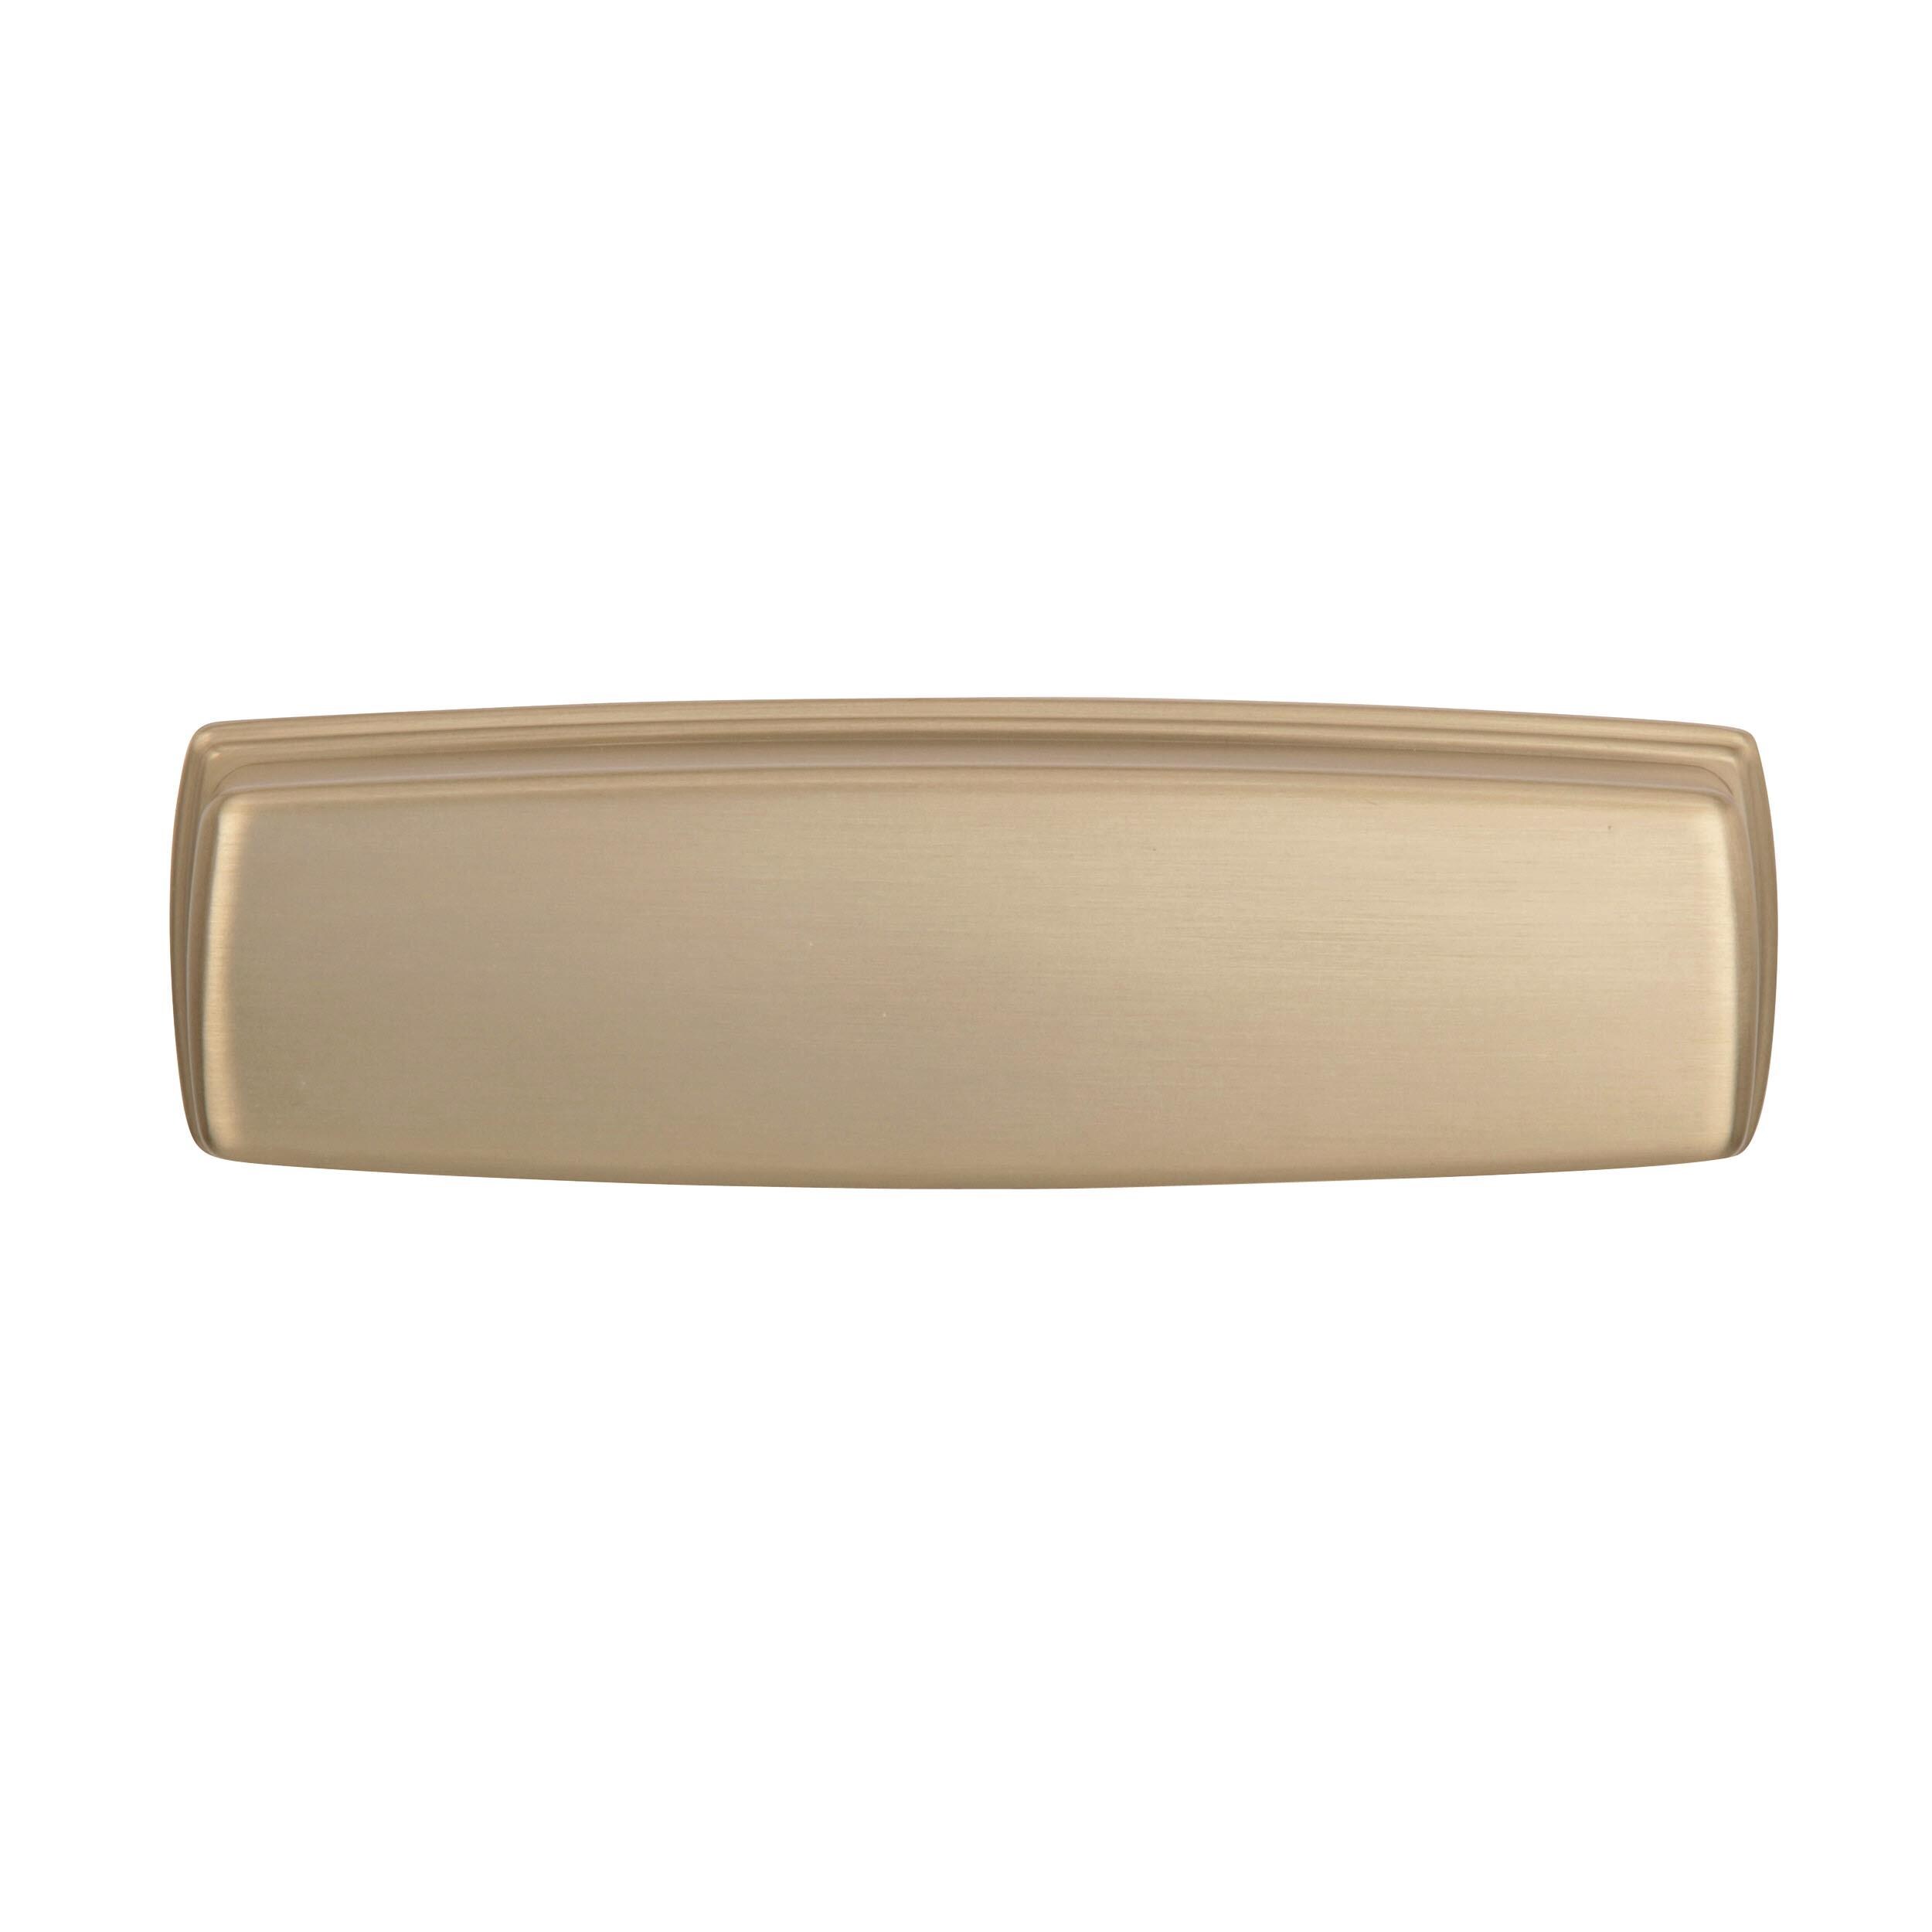 Amerock in at Cup Kane Golden Champagne Drawer 3-3/4-in Center Center the Rectangular Drawer Pulls department Pulls to